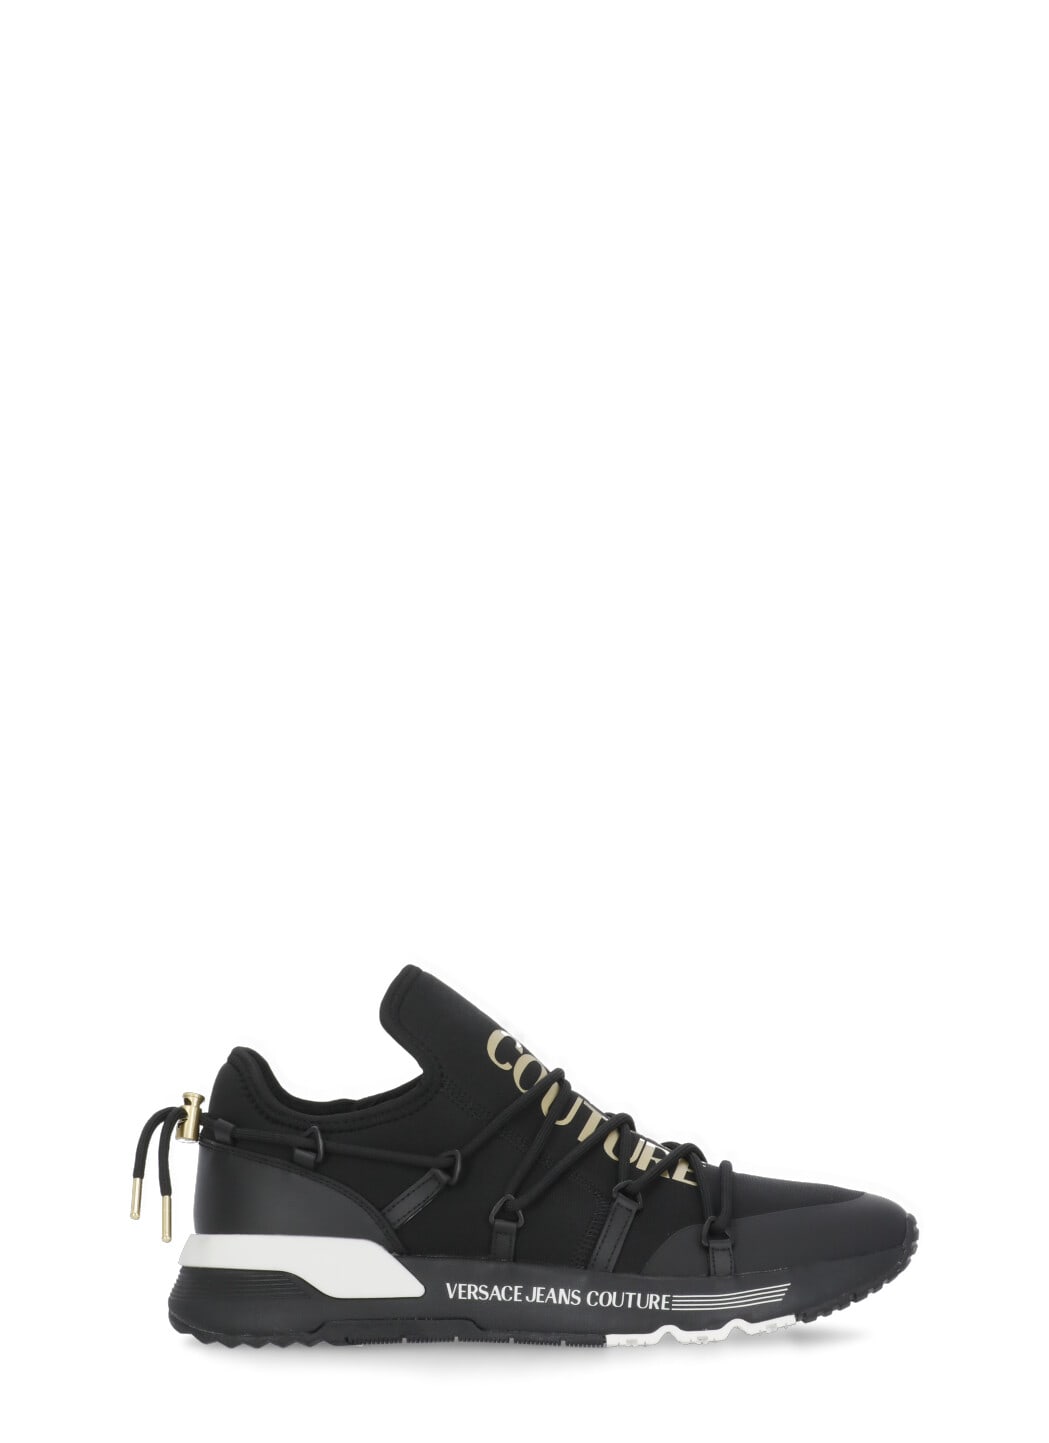 VERSACE JEANS COUTURE DYNAMIC SNEAKERS